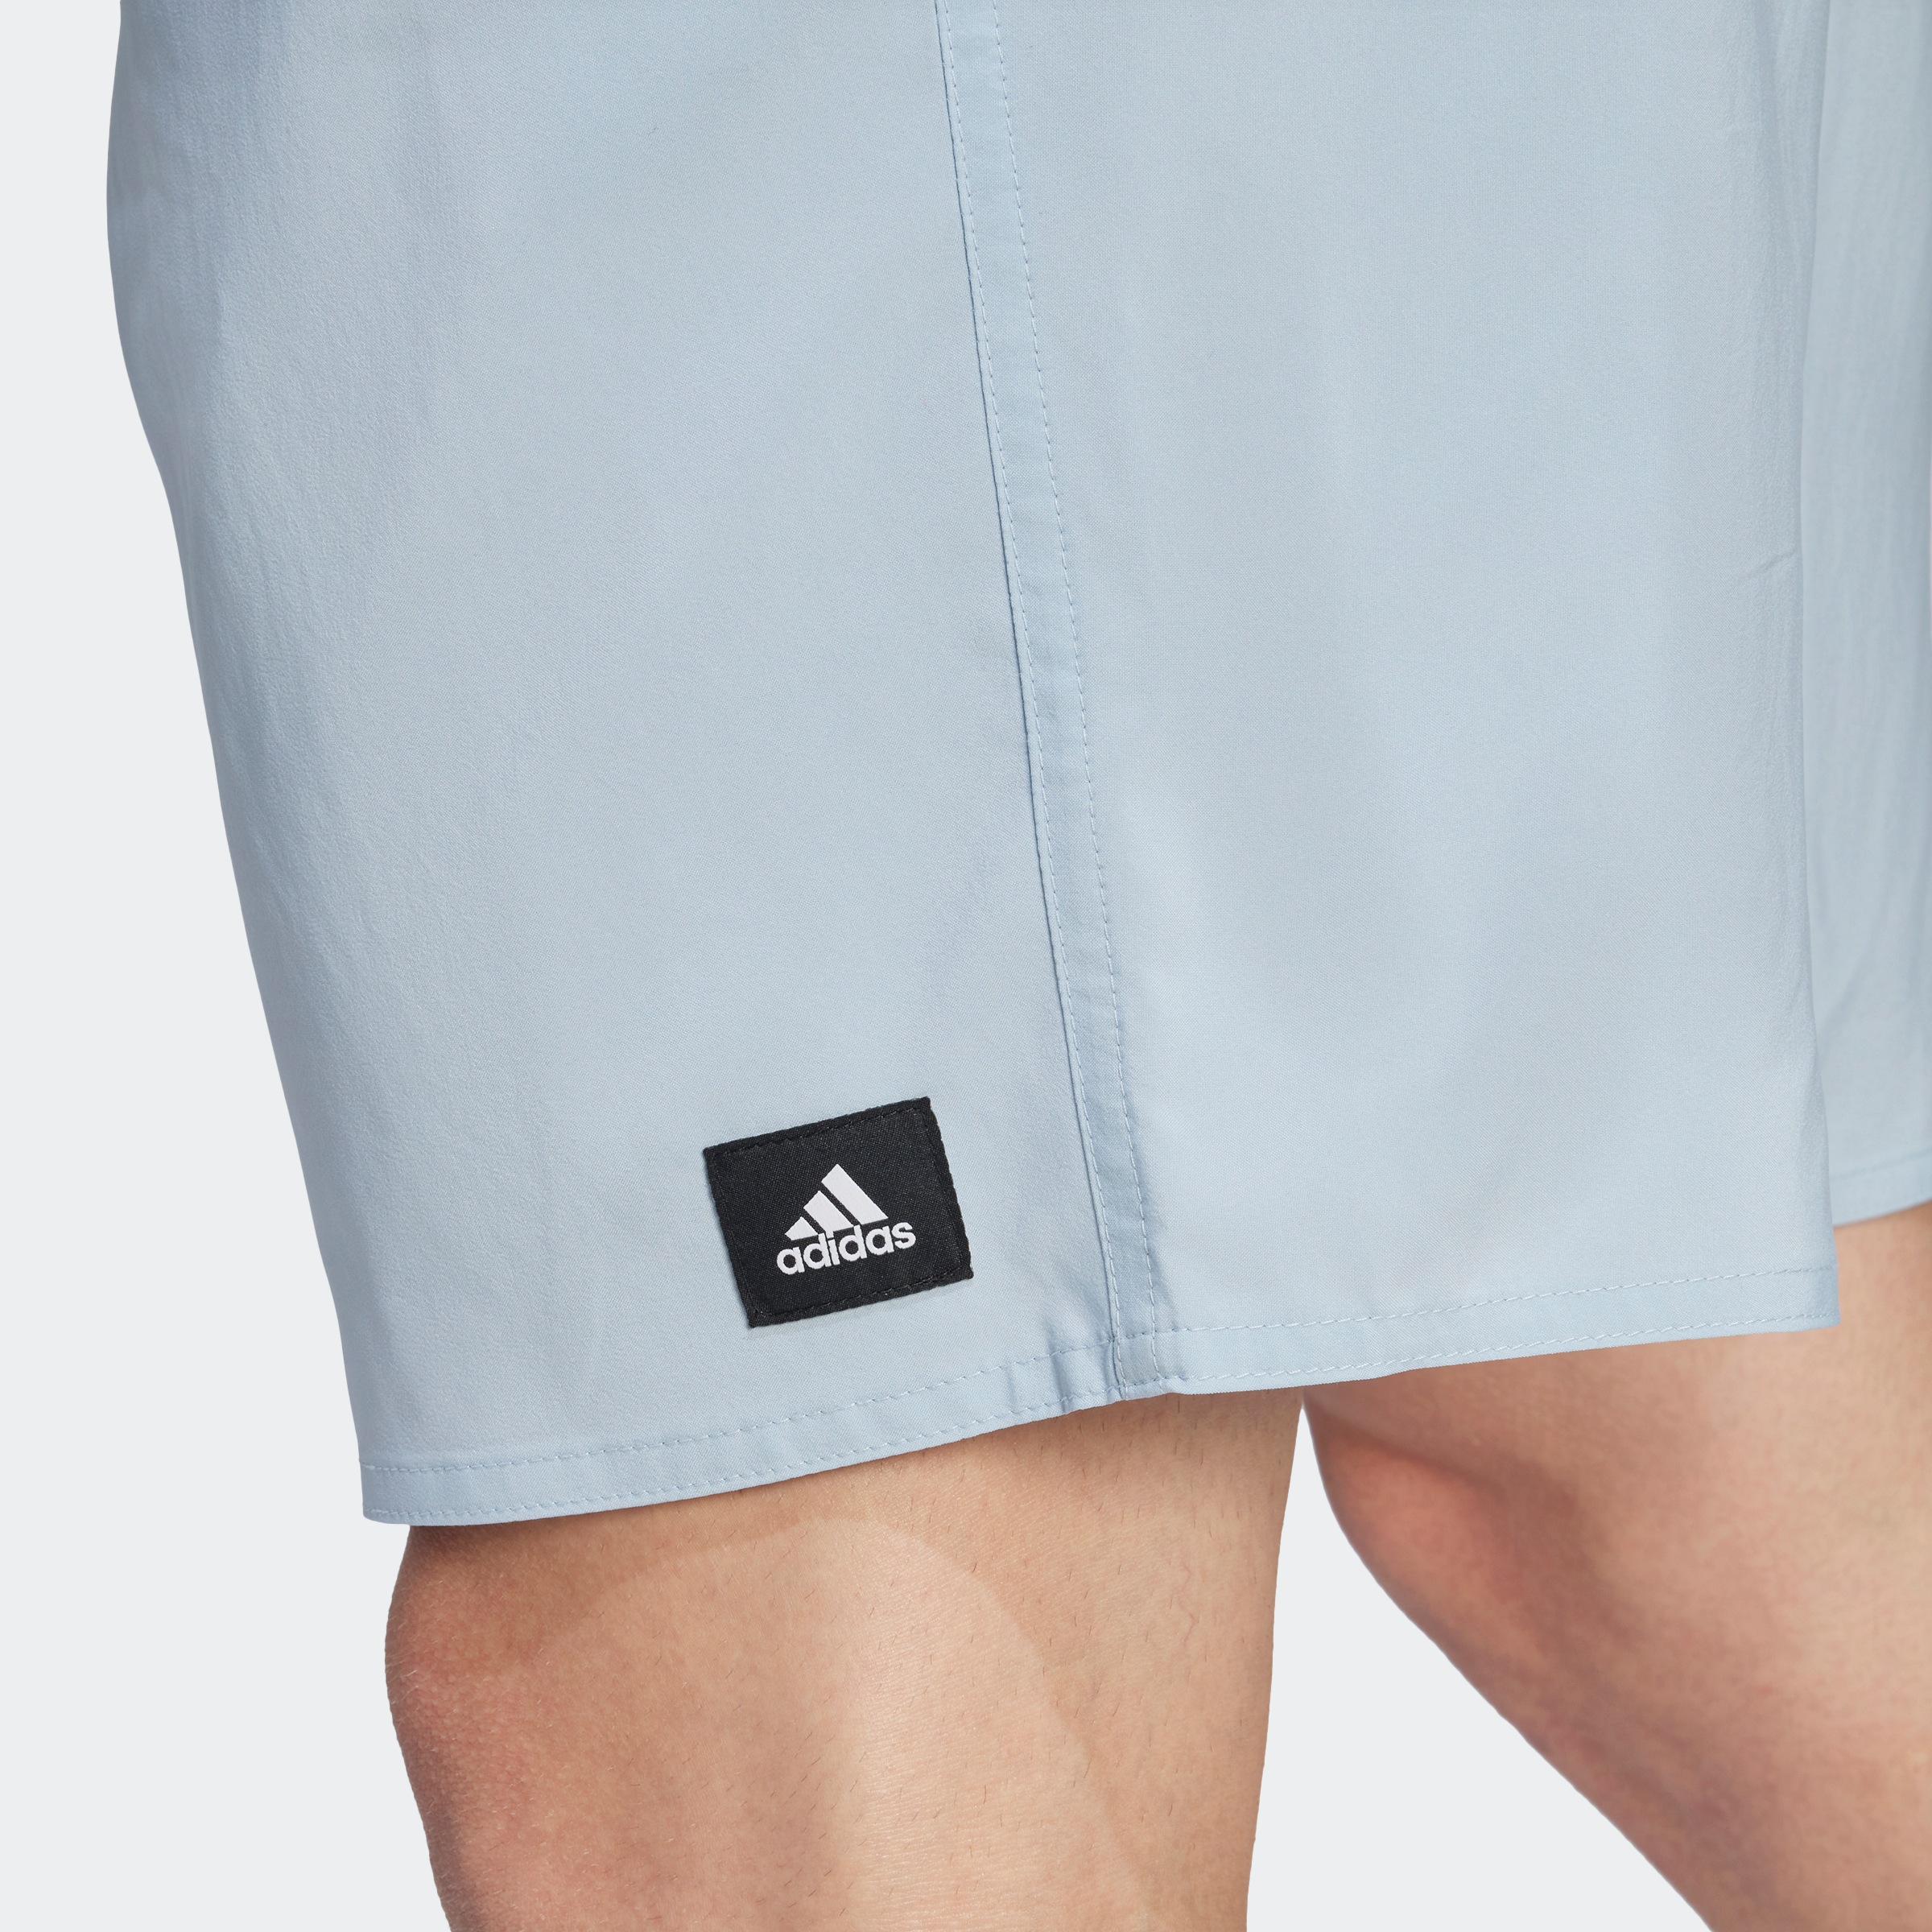 Shop Online adidas St.) Performance OTTO Badehose »SOLID CLASSICLENGTH«, im (1 CLX